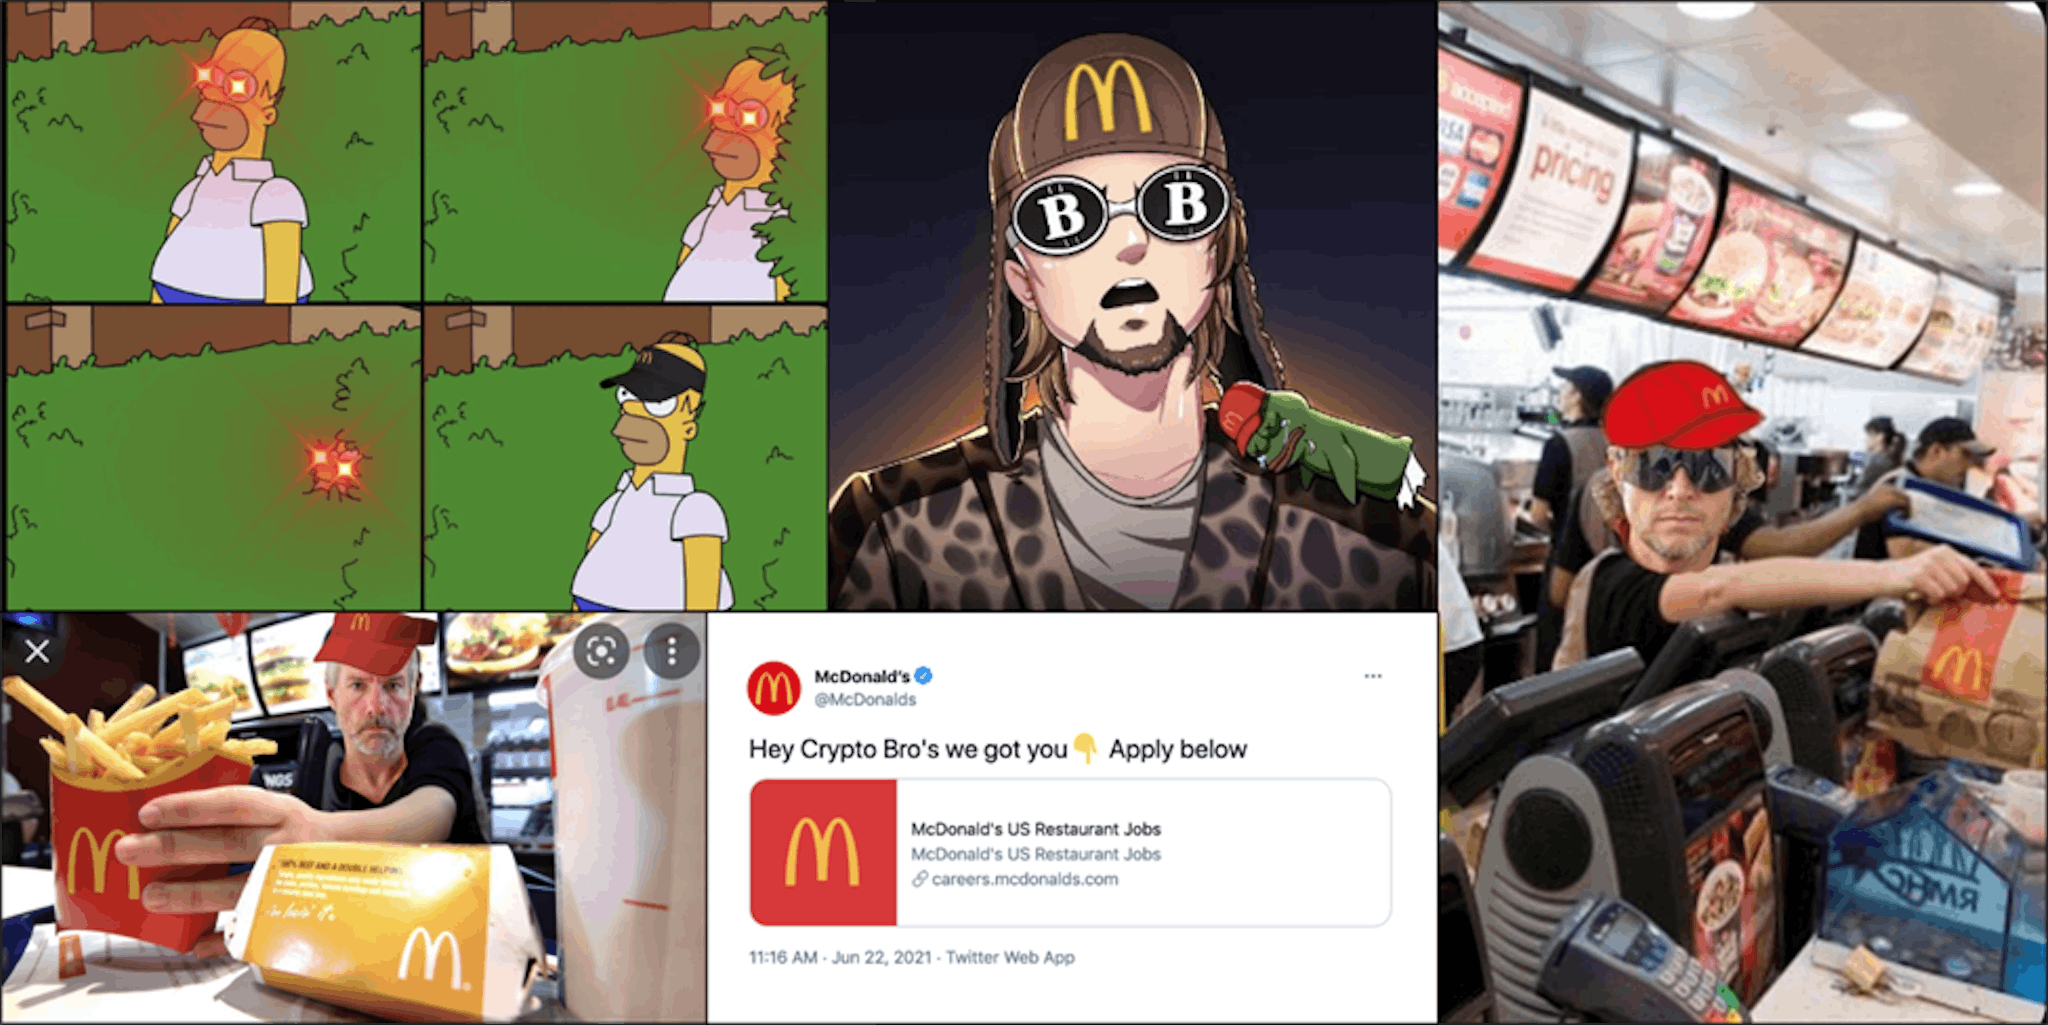 Working at McDonald's is a cyclical meme that comes back every time markets crash